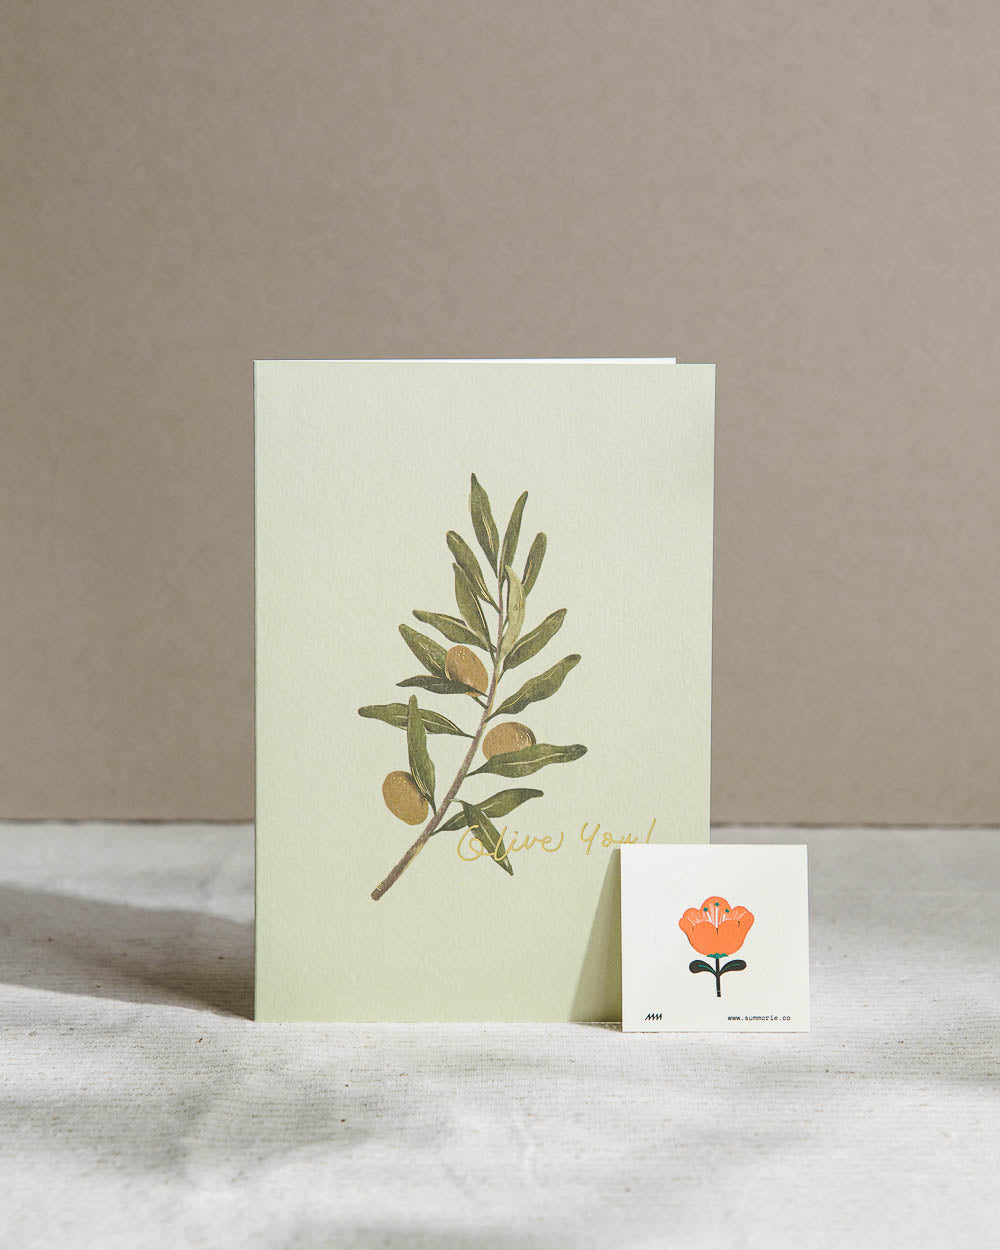 Olive You Greeting Card